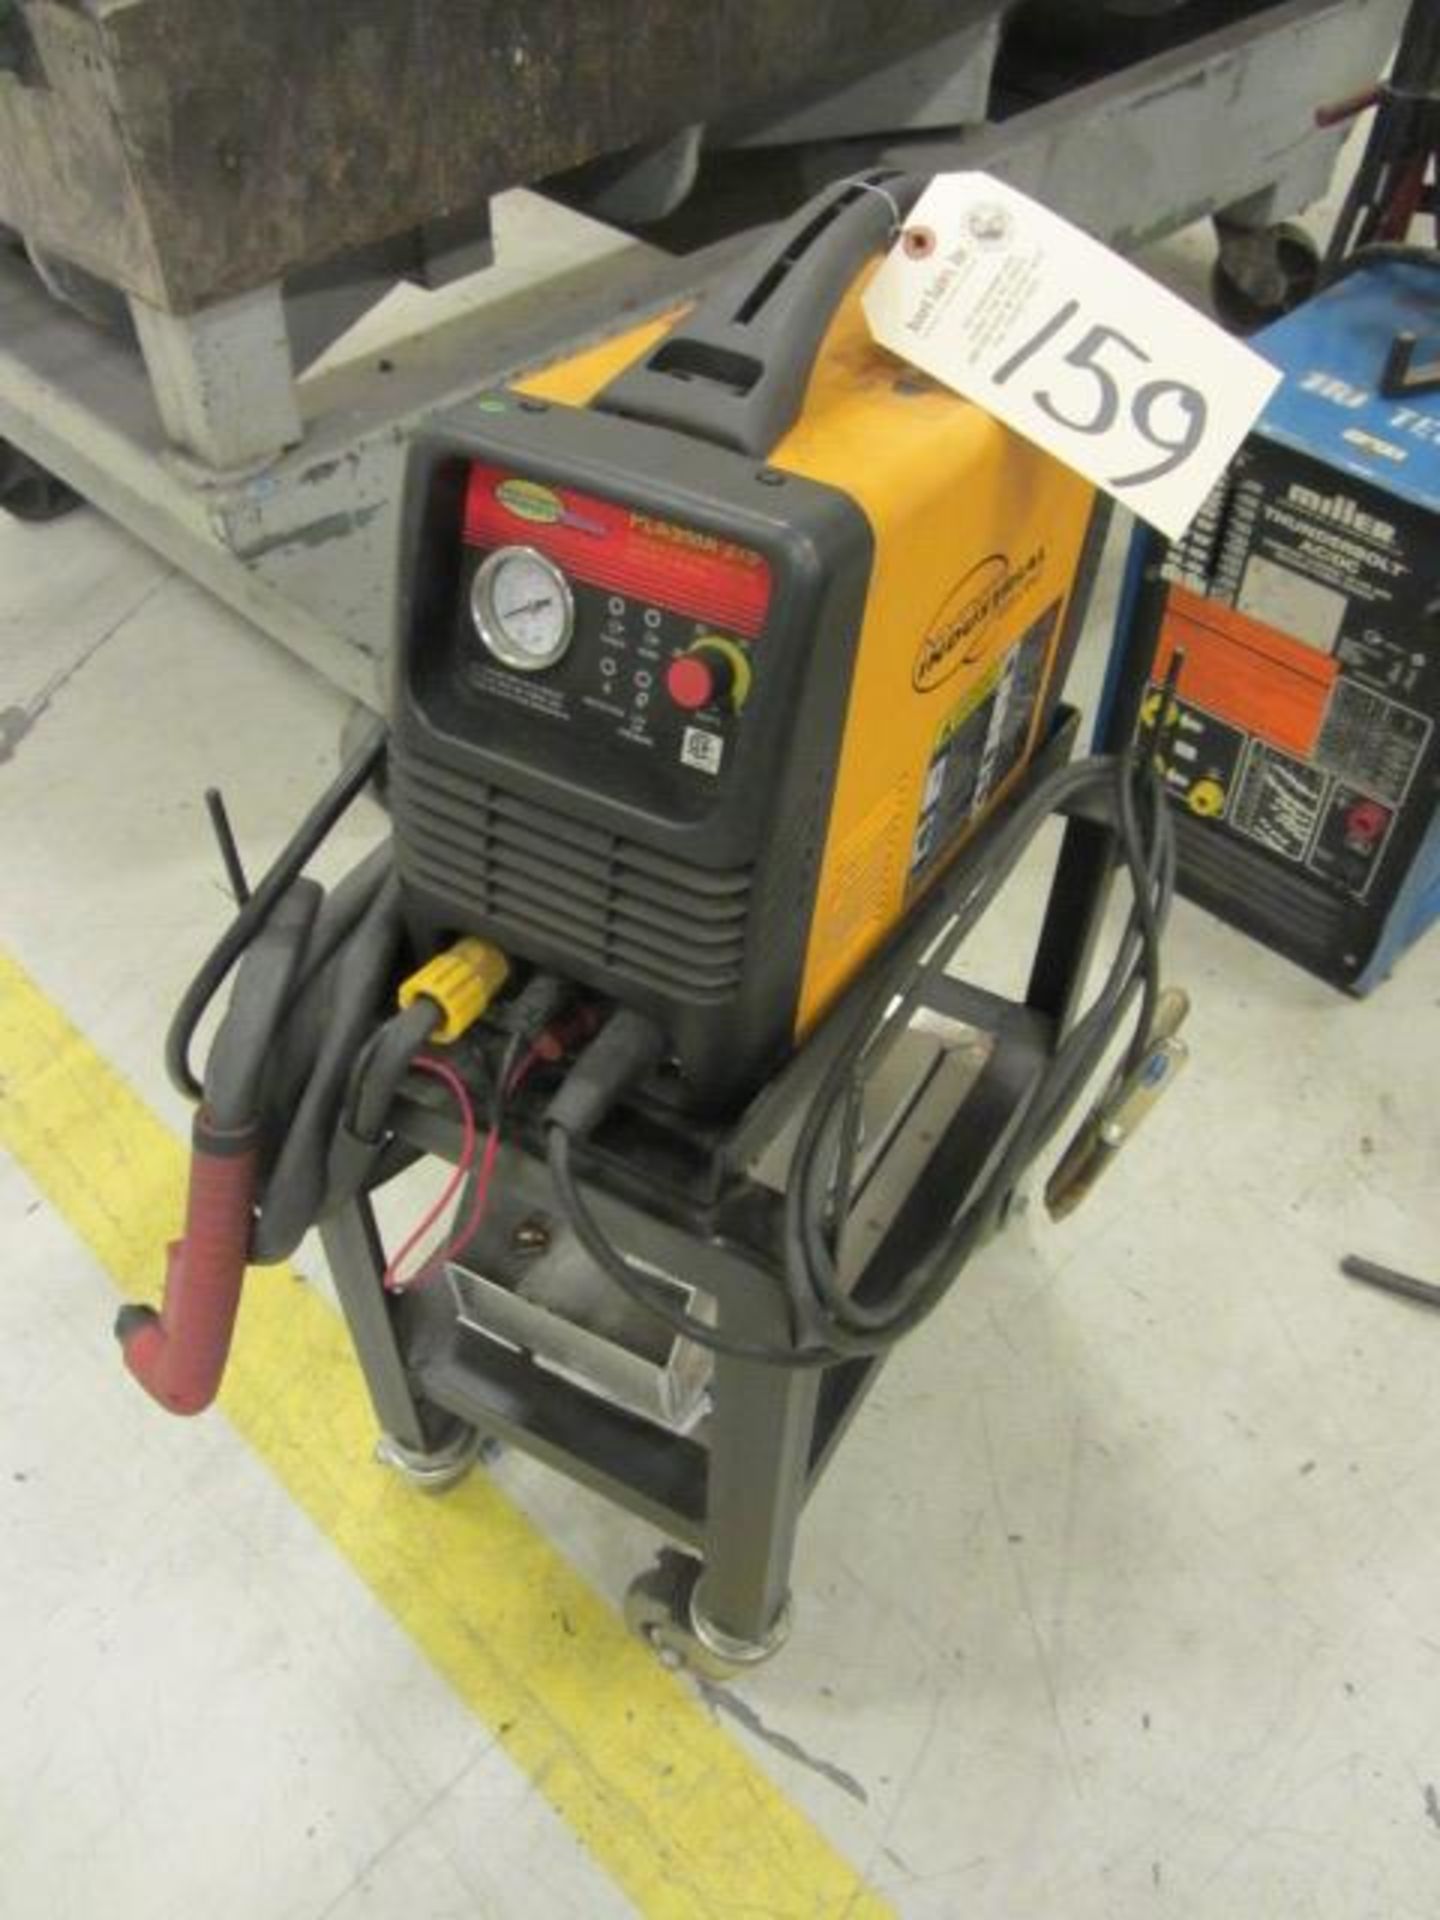 Norther Industrial Plasma 375 Cutter